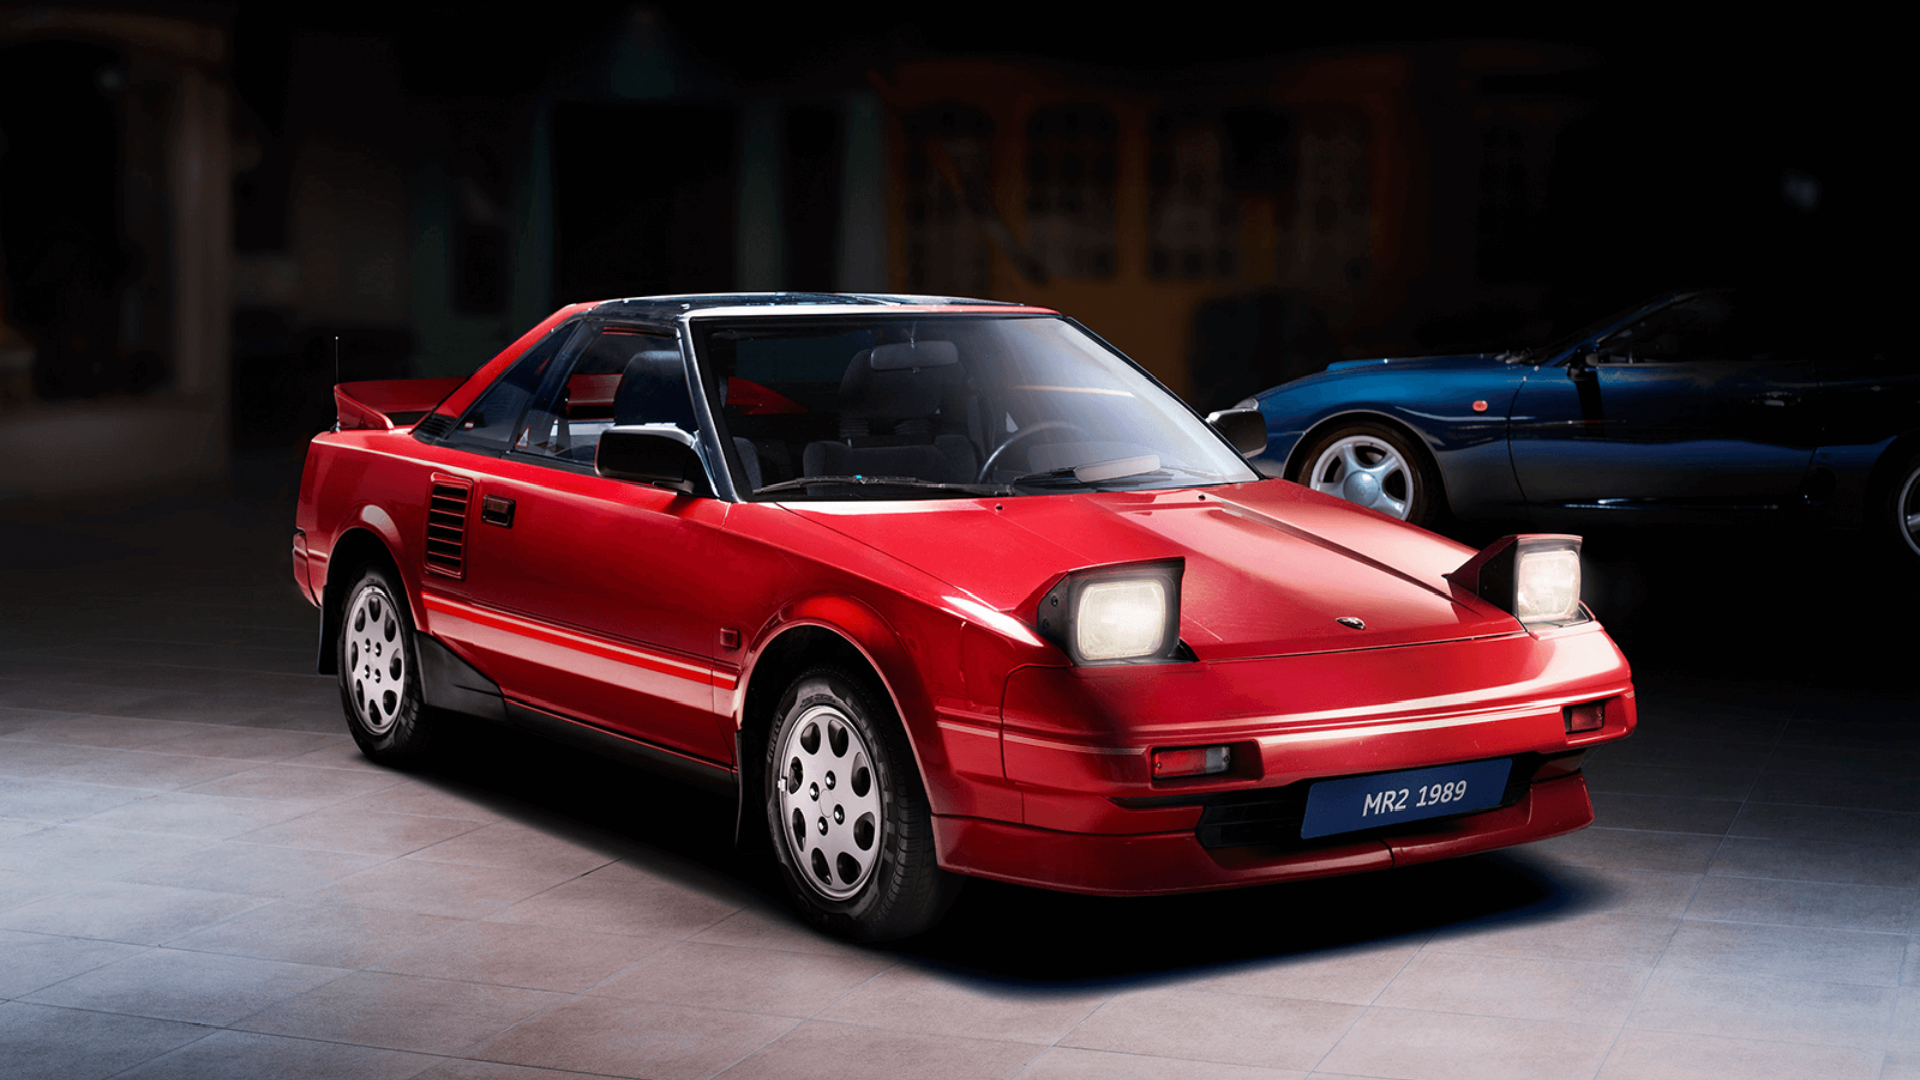 Toyota MR2 Reportedly Being Considered for EV Revival